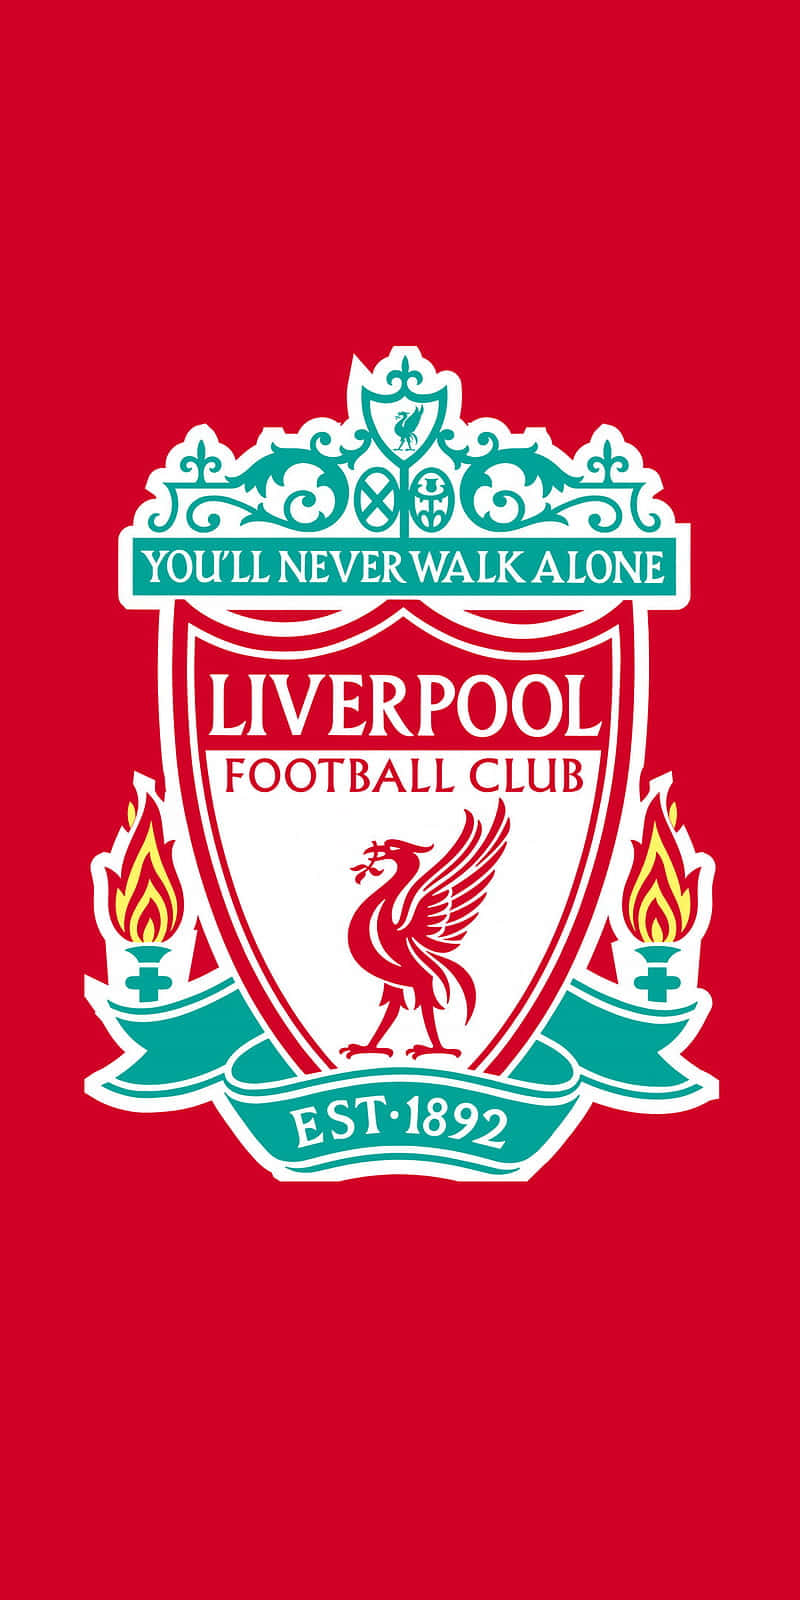 Show Your Liverpool Pride and Support with an iPhone Wallpaper